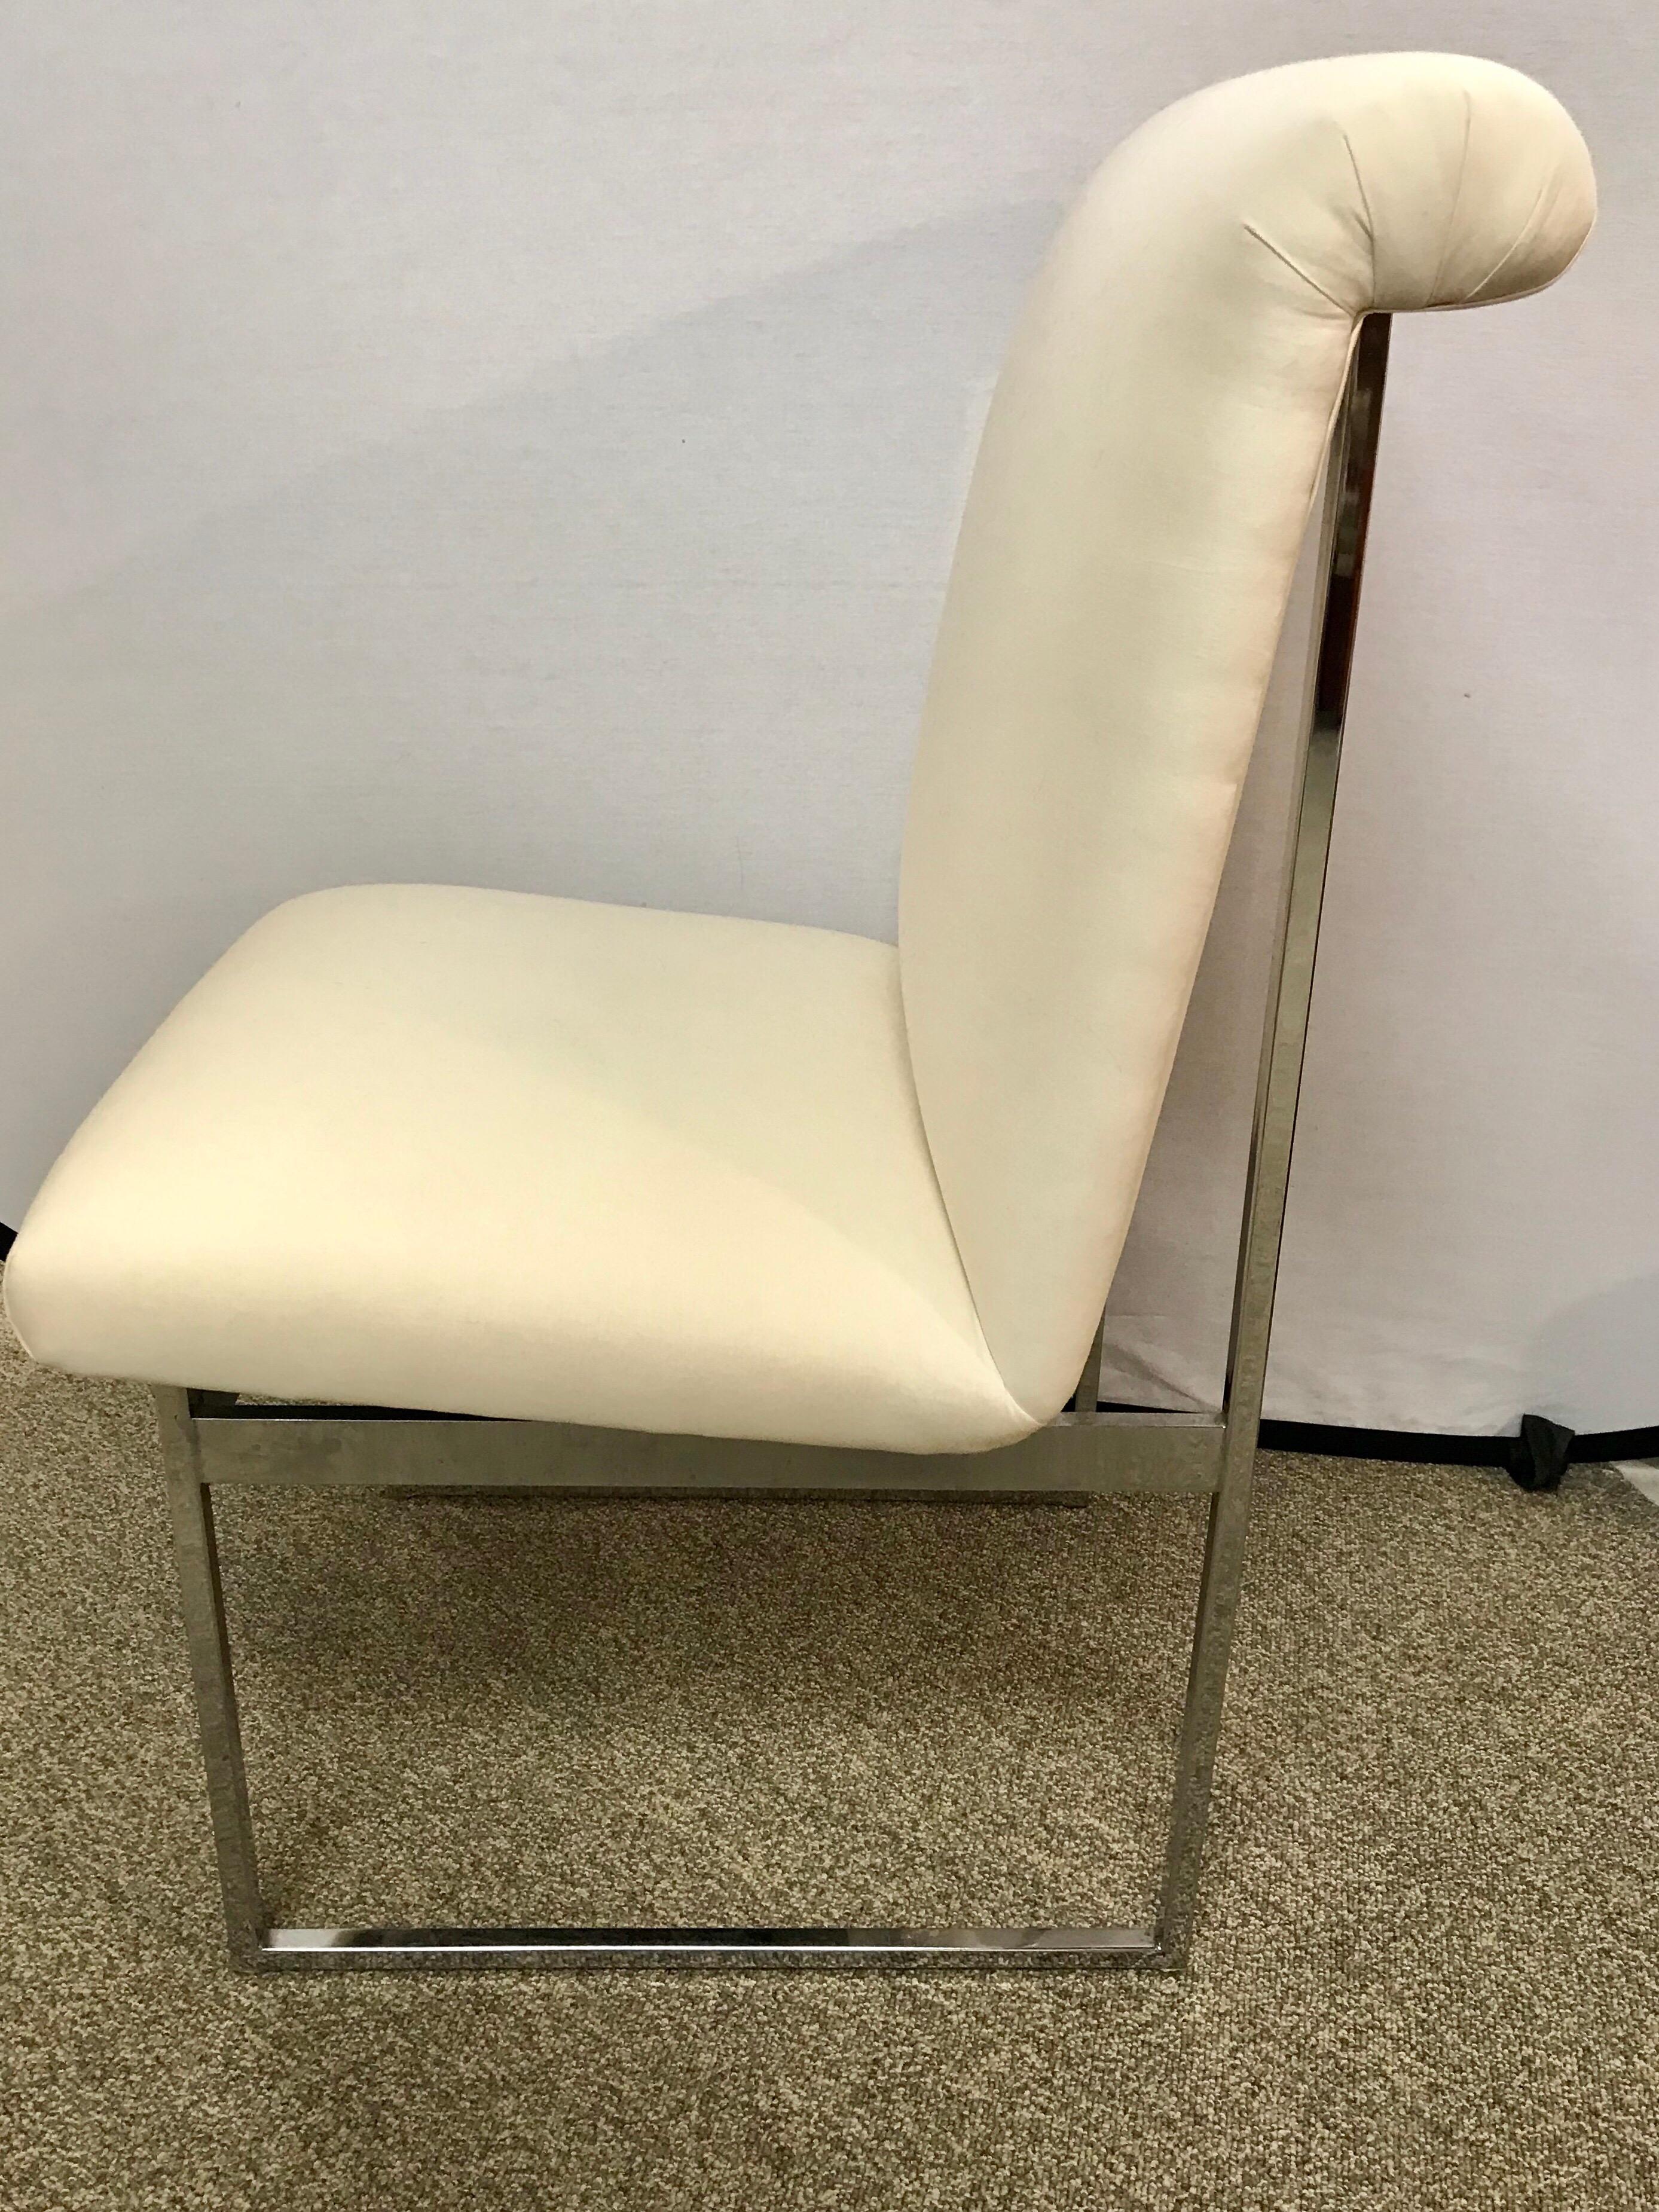 Elegant Milo Baughman style midcentury chair with polished steel and off white newer fabric.